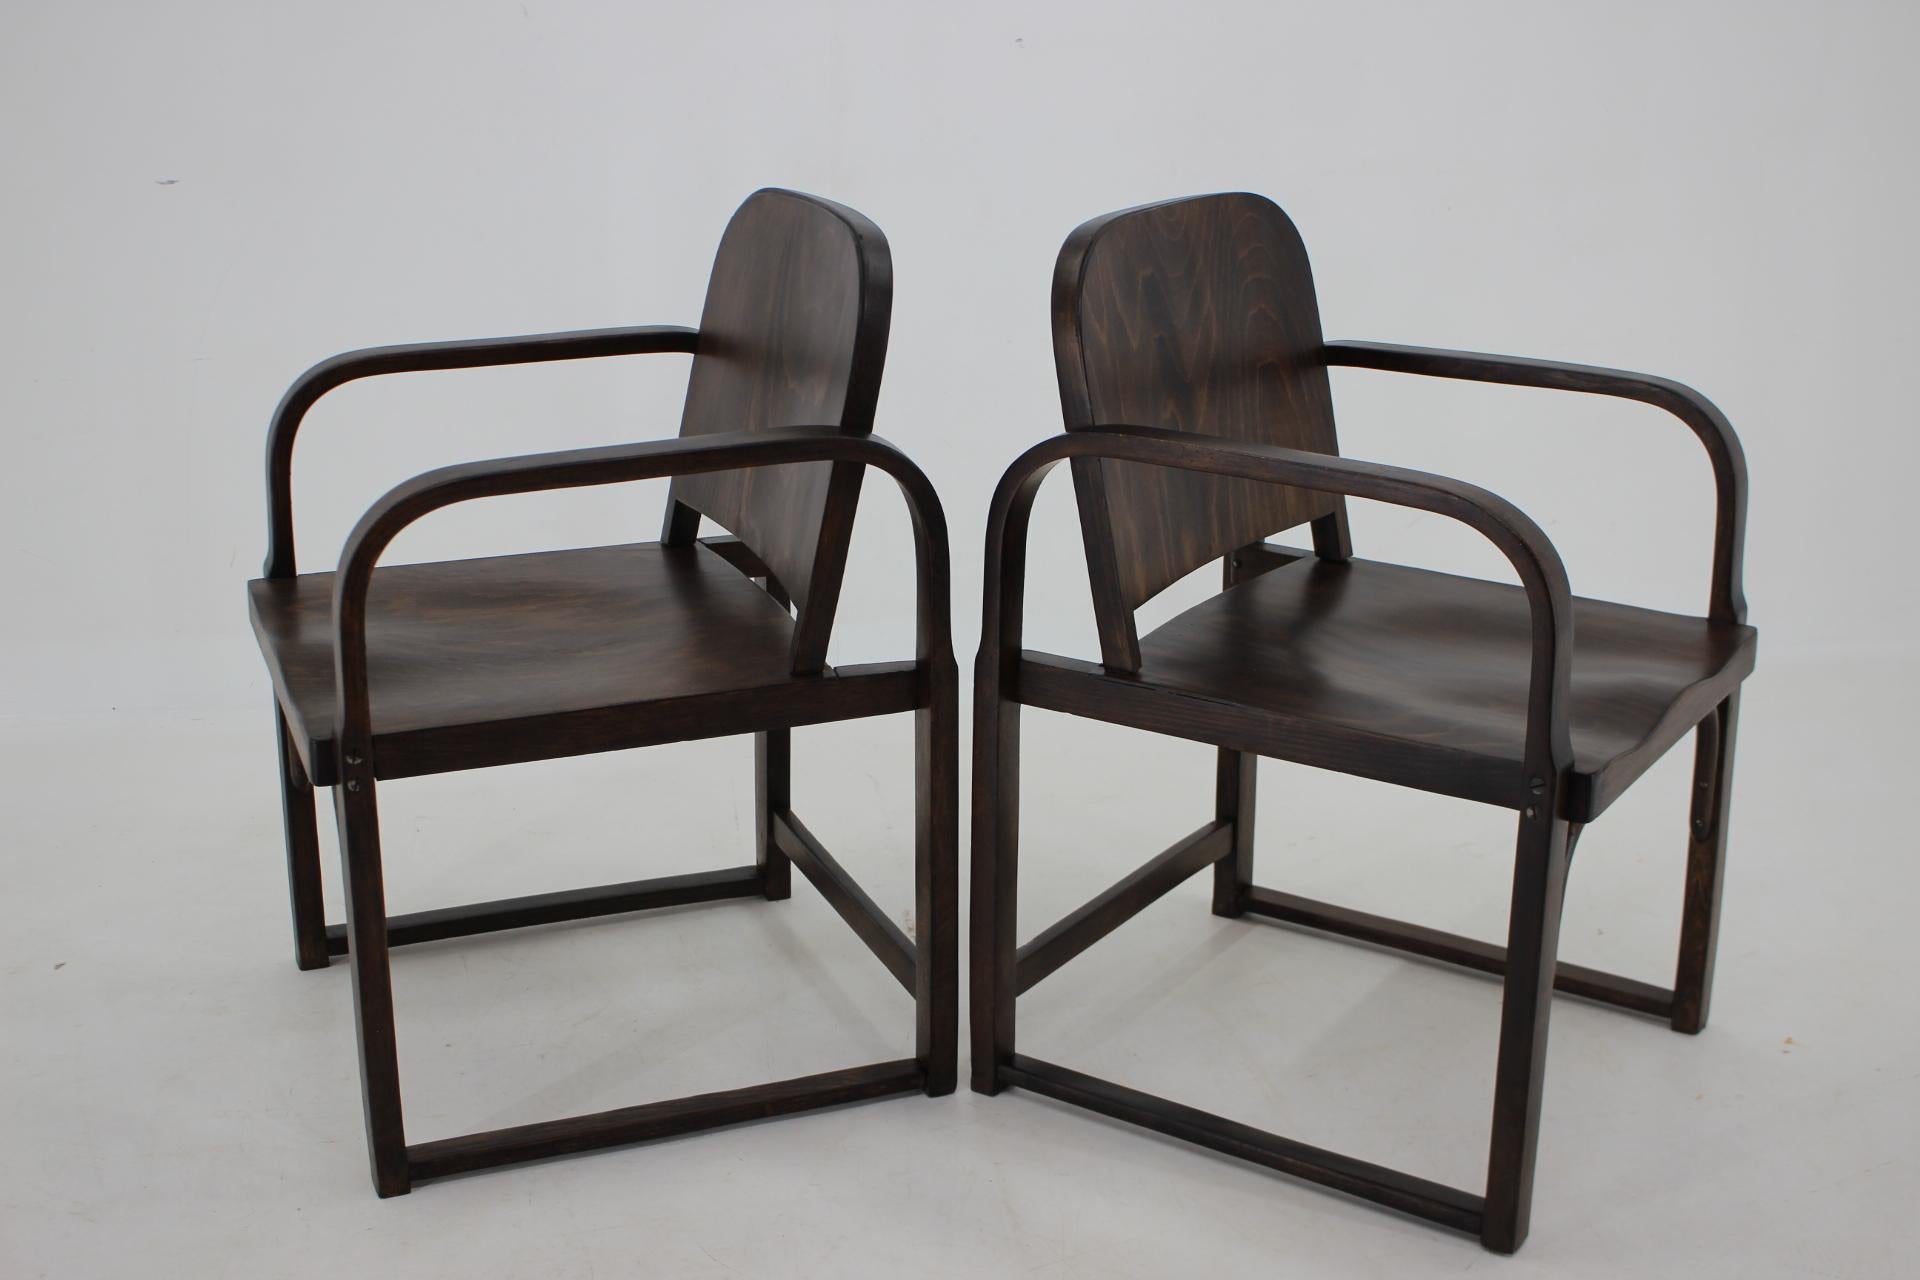 Wood 1930s Pair of Thonet Bentwood Armchairs A745 by Tatra, Czechoslovakia For Sale